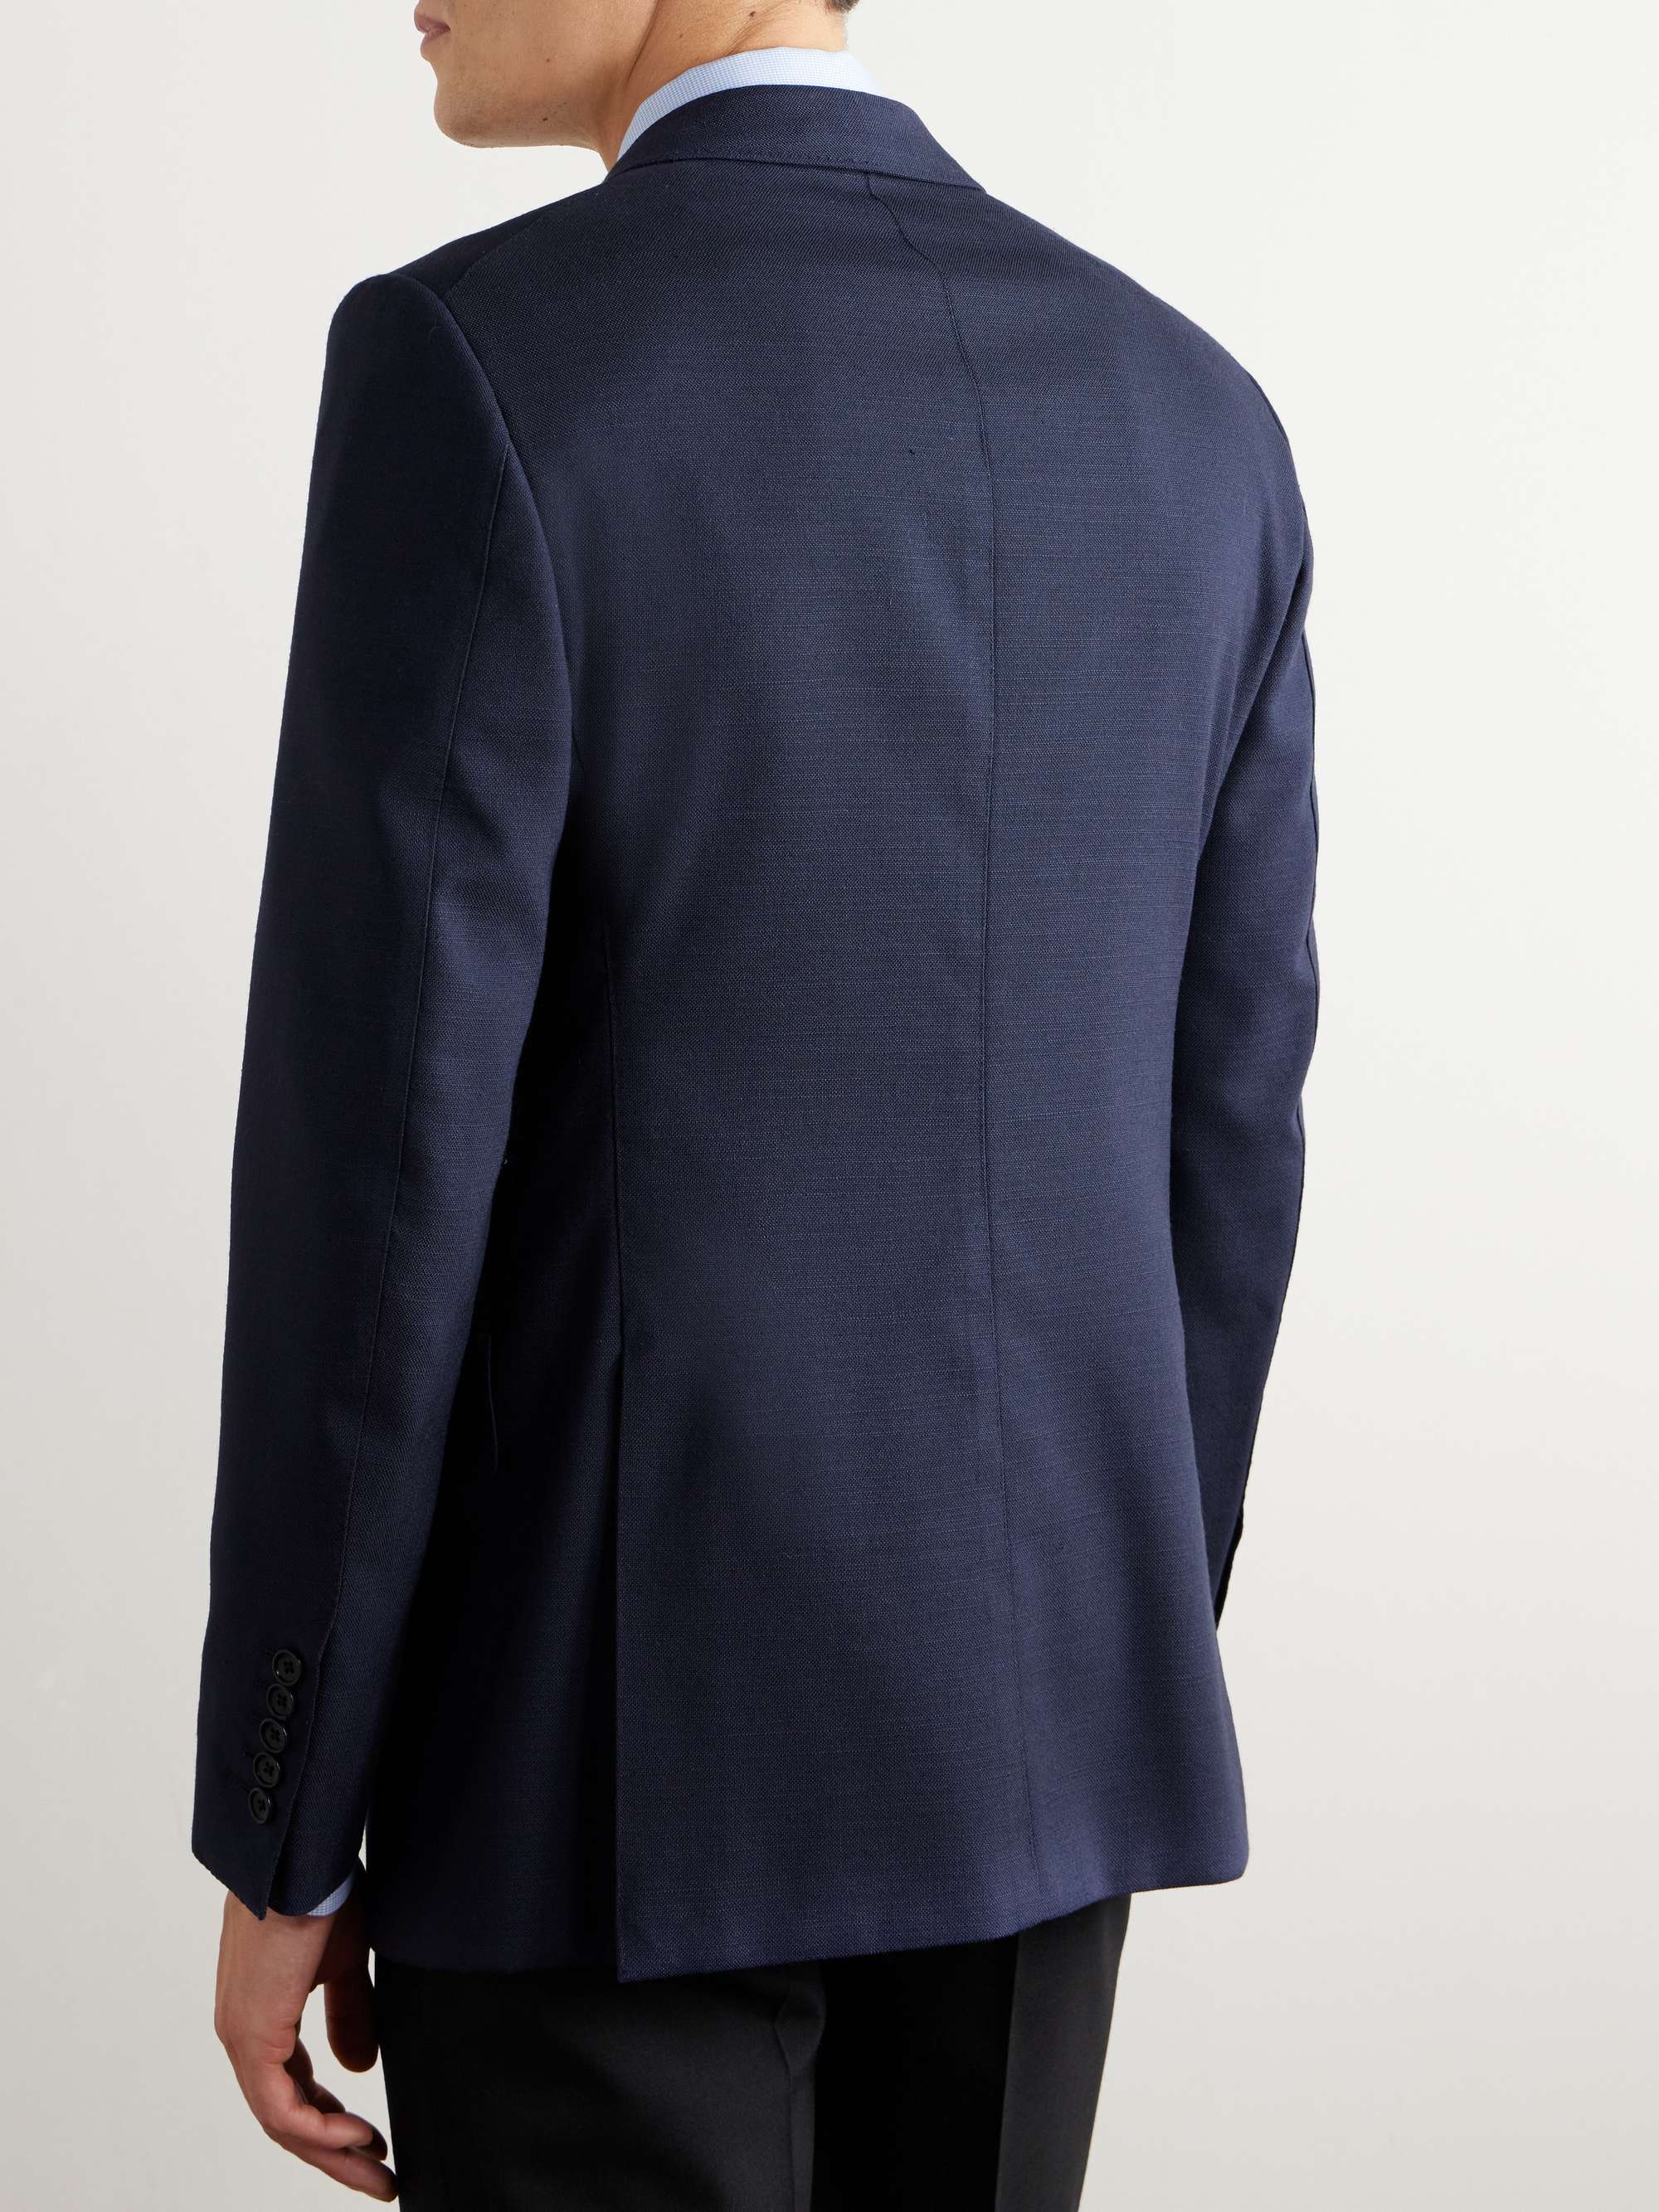 TOM FORD Shelton Slim-Fit Silk, Wool and Mohair-Blend Hopsack Suit ...